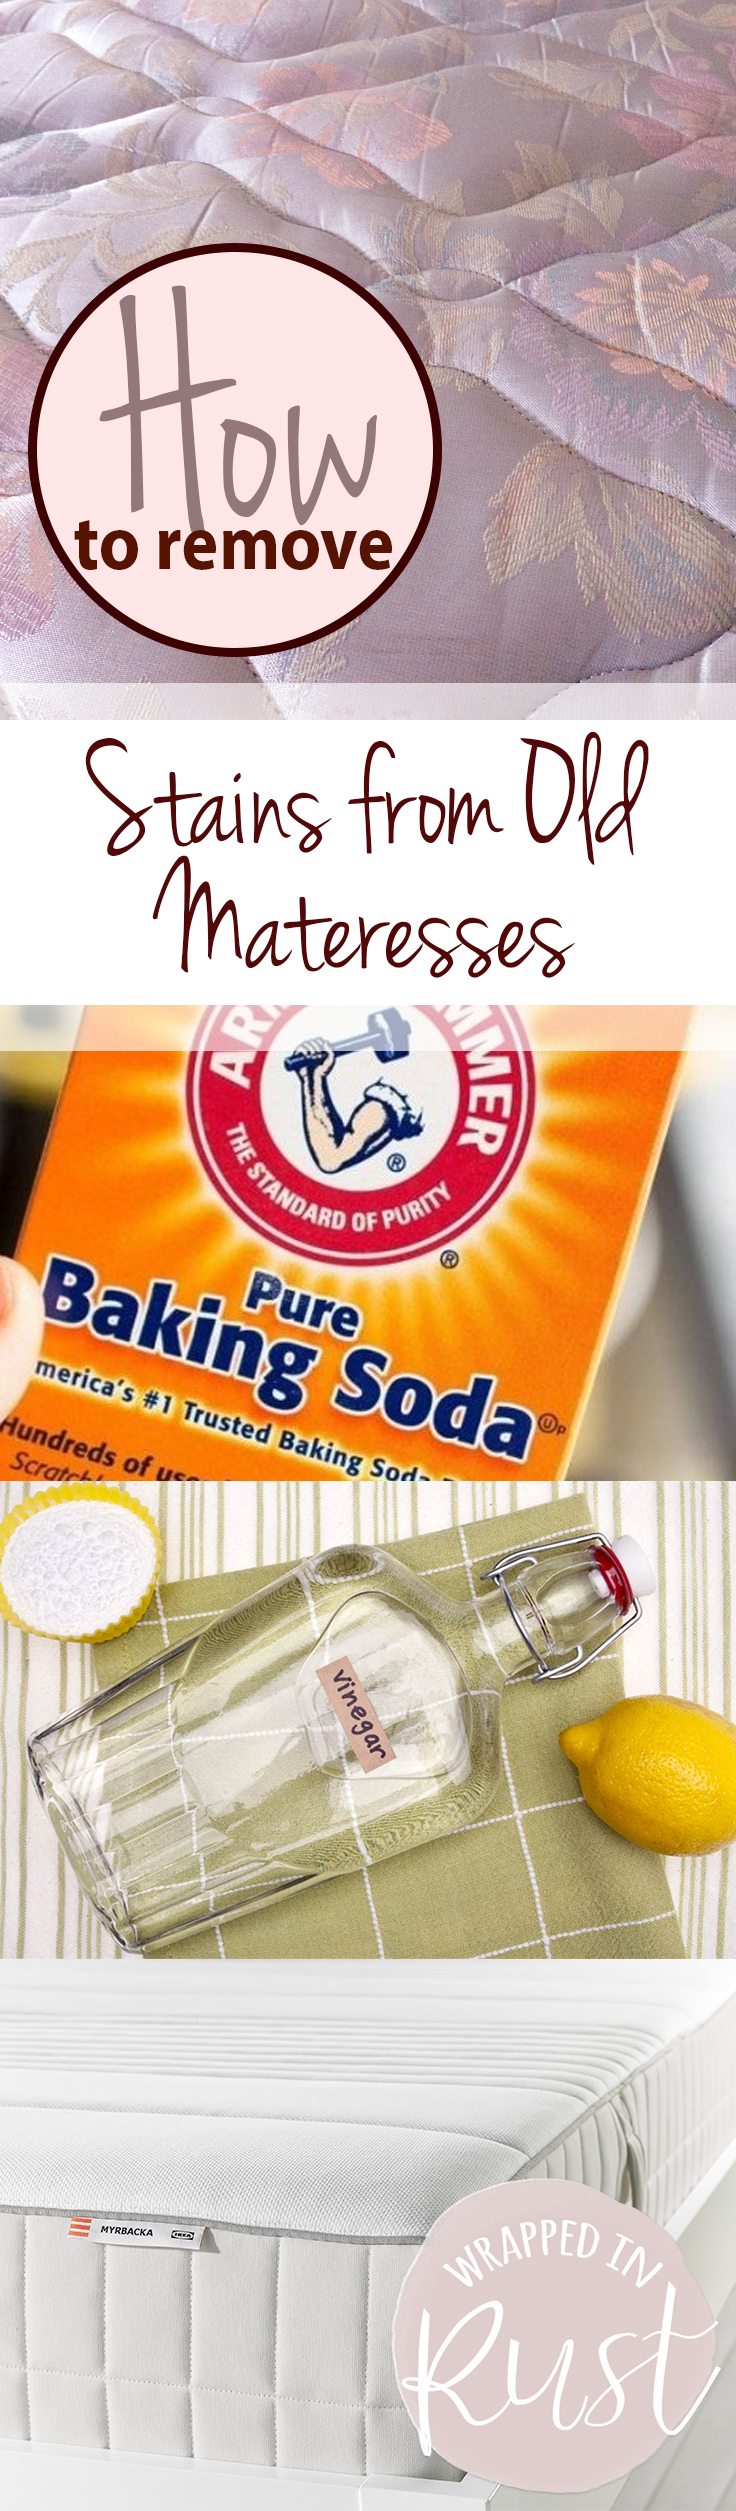 How to Remove Stains from Matresses, Removing Stains from Matresses, How to Easily Remove Stains from Matresses, Home Organization, Clean Home, Clean Everything, How to Clean Everything, How to Clean a Matress. Popular Pin